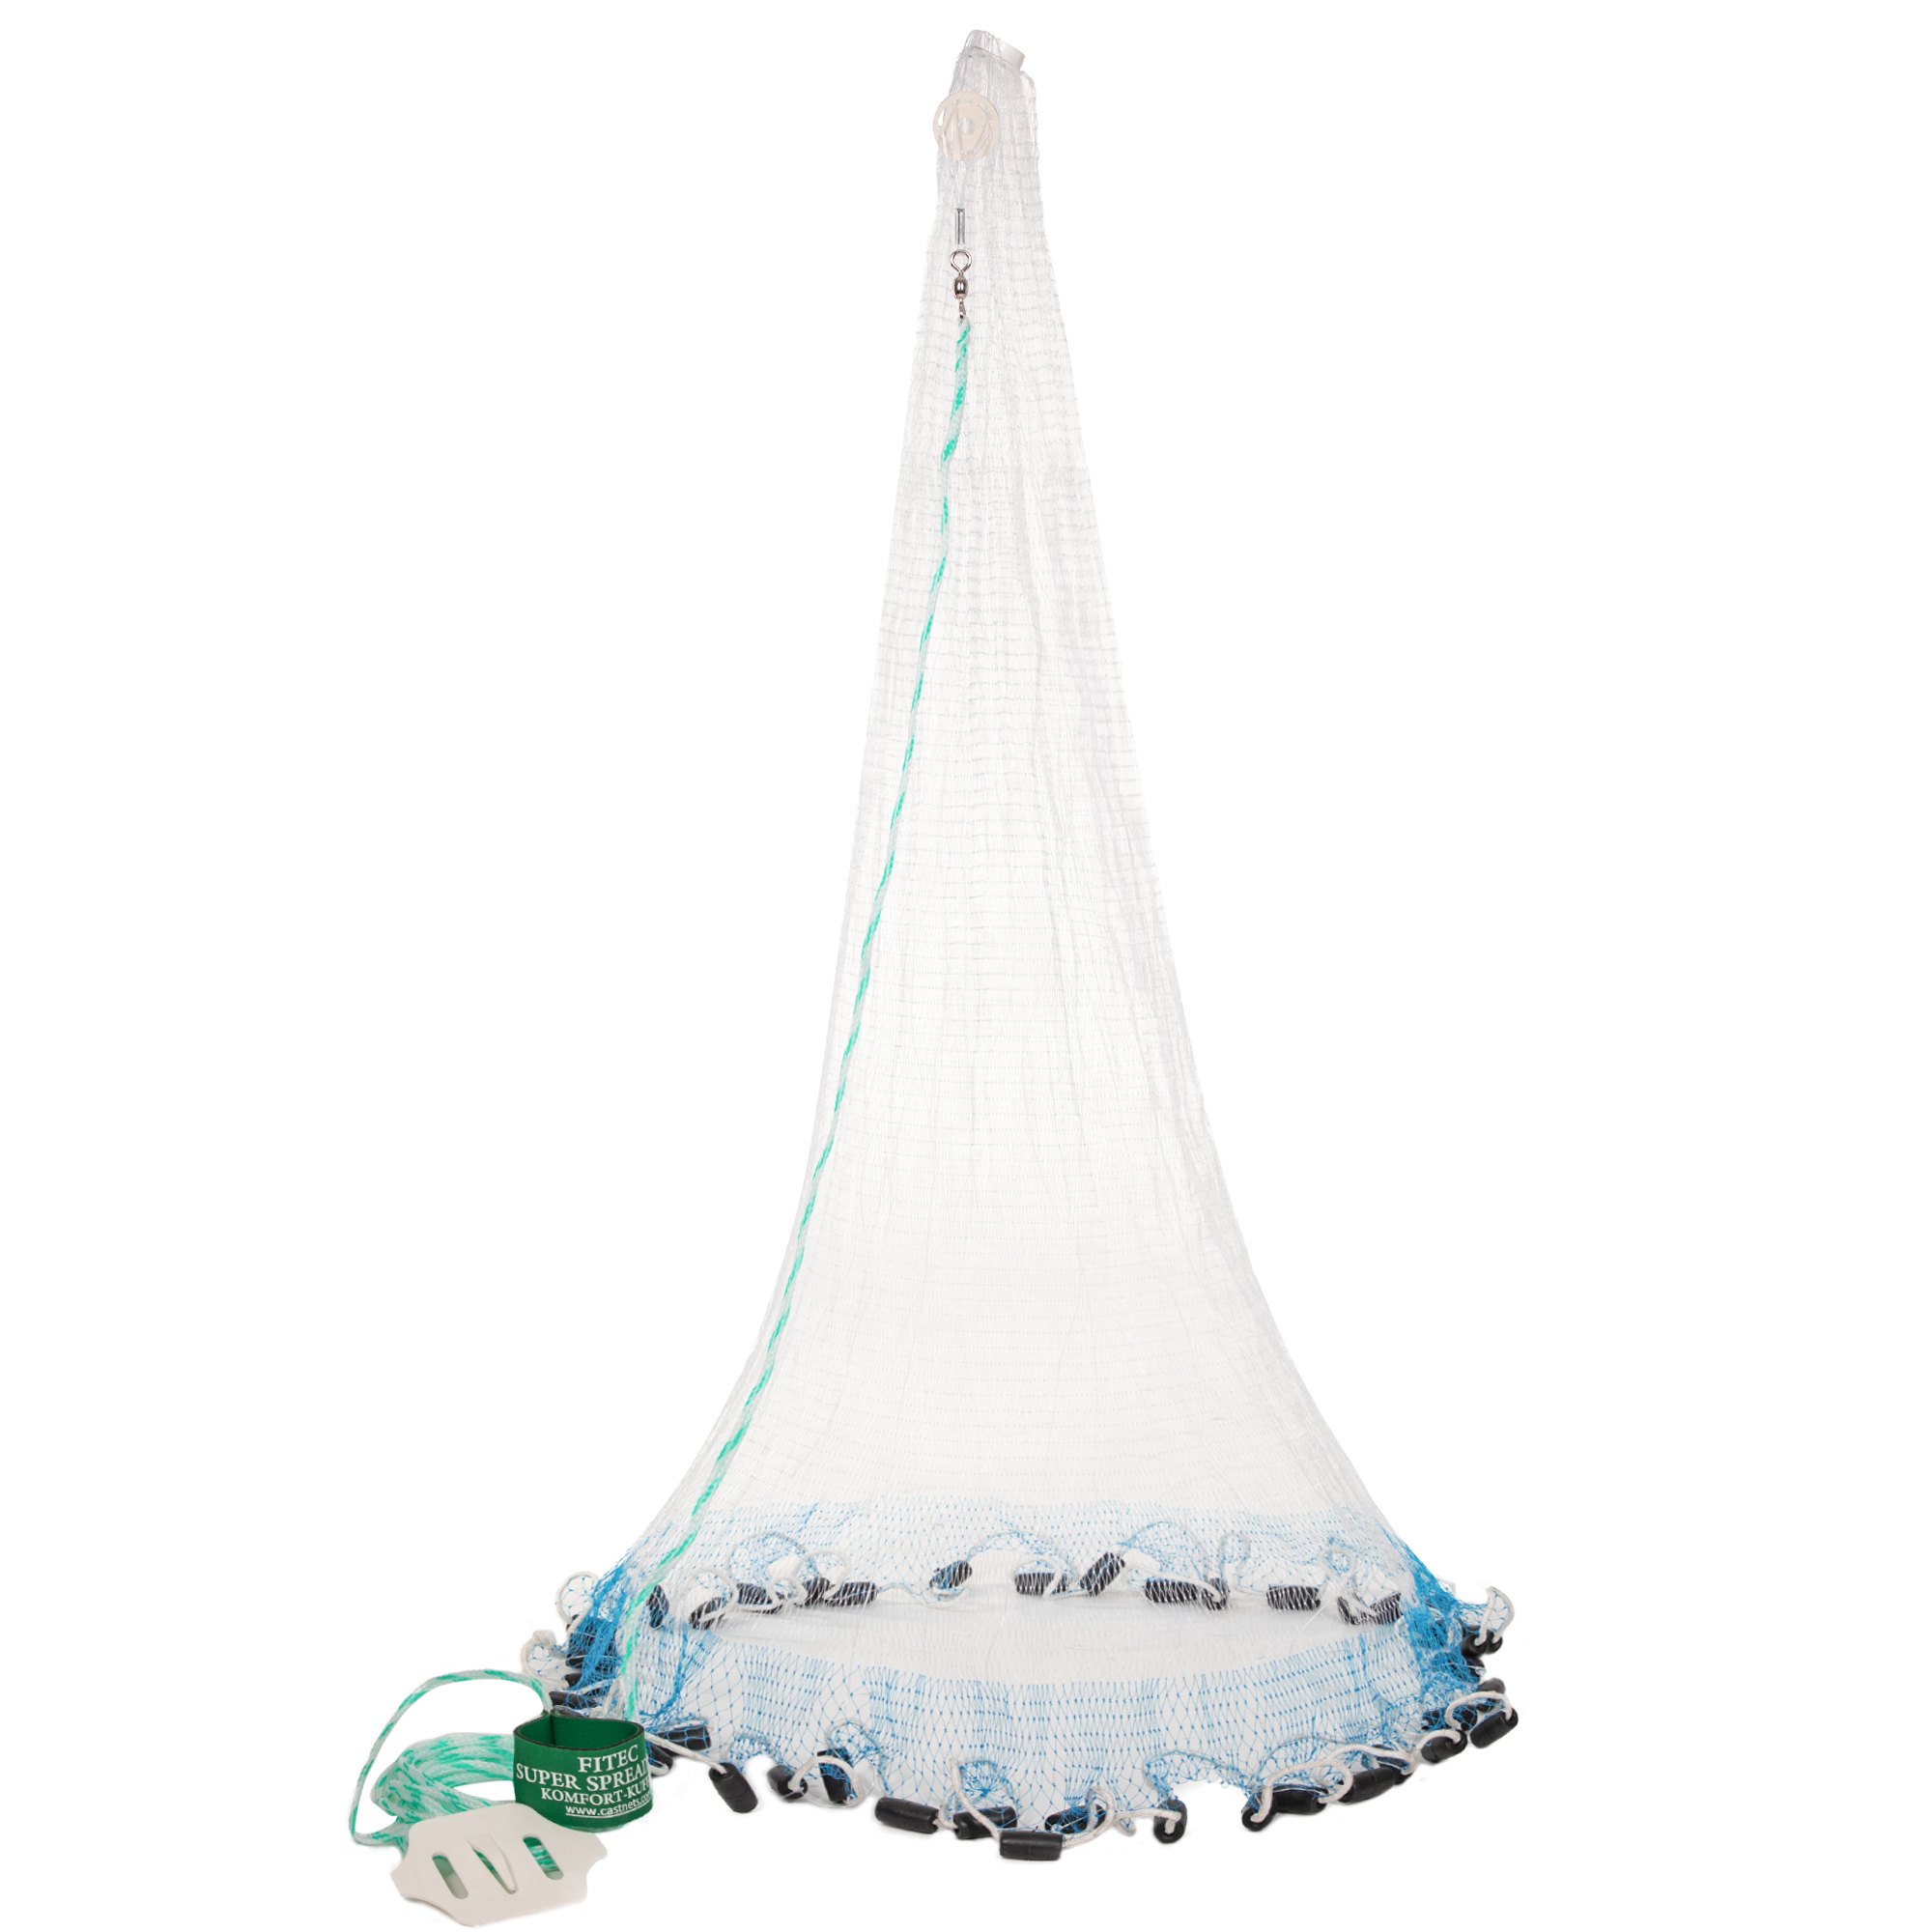 Cast Nets by Fitec - The Best-Selling Cast Nets in America!